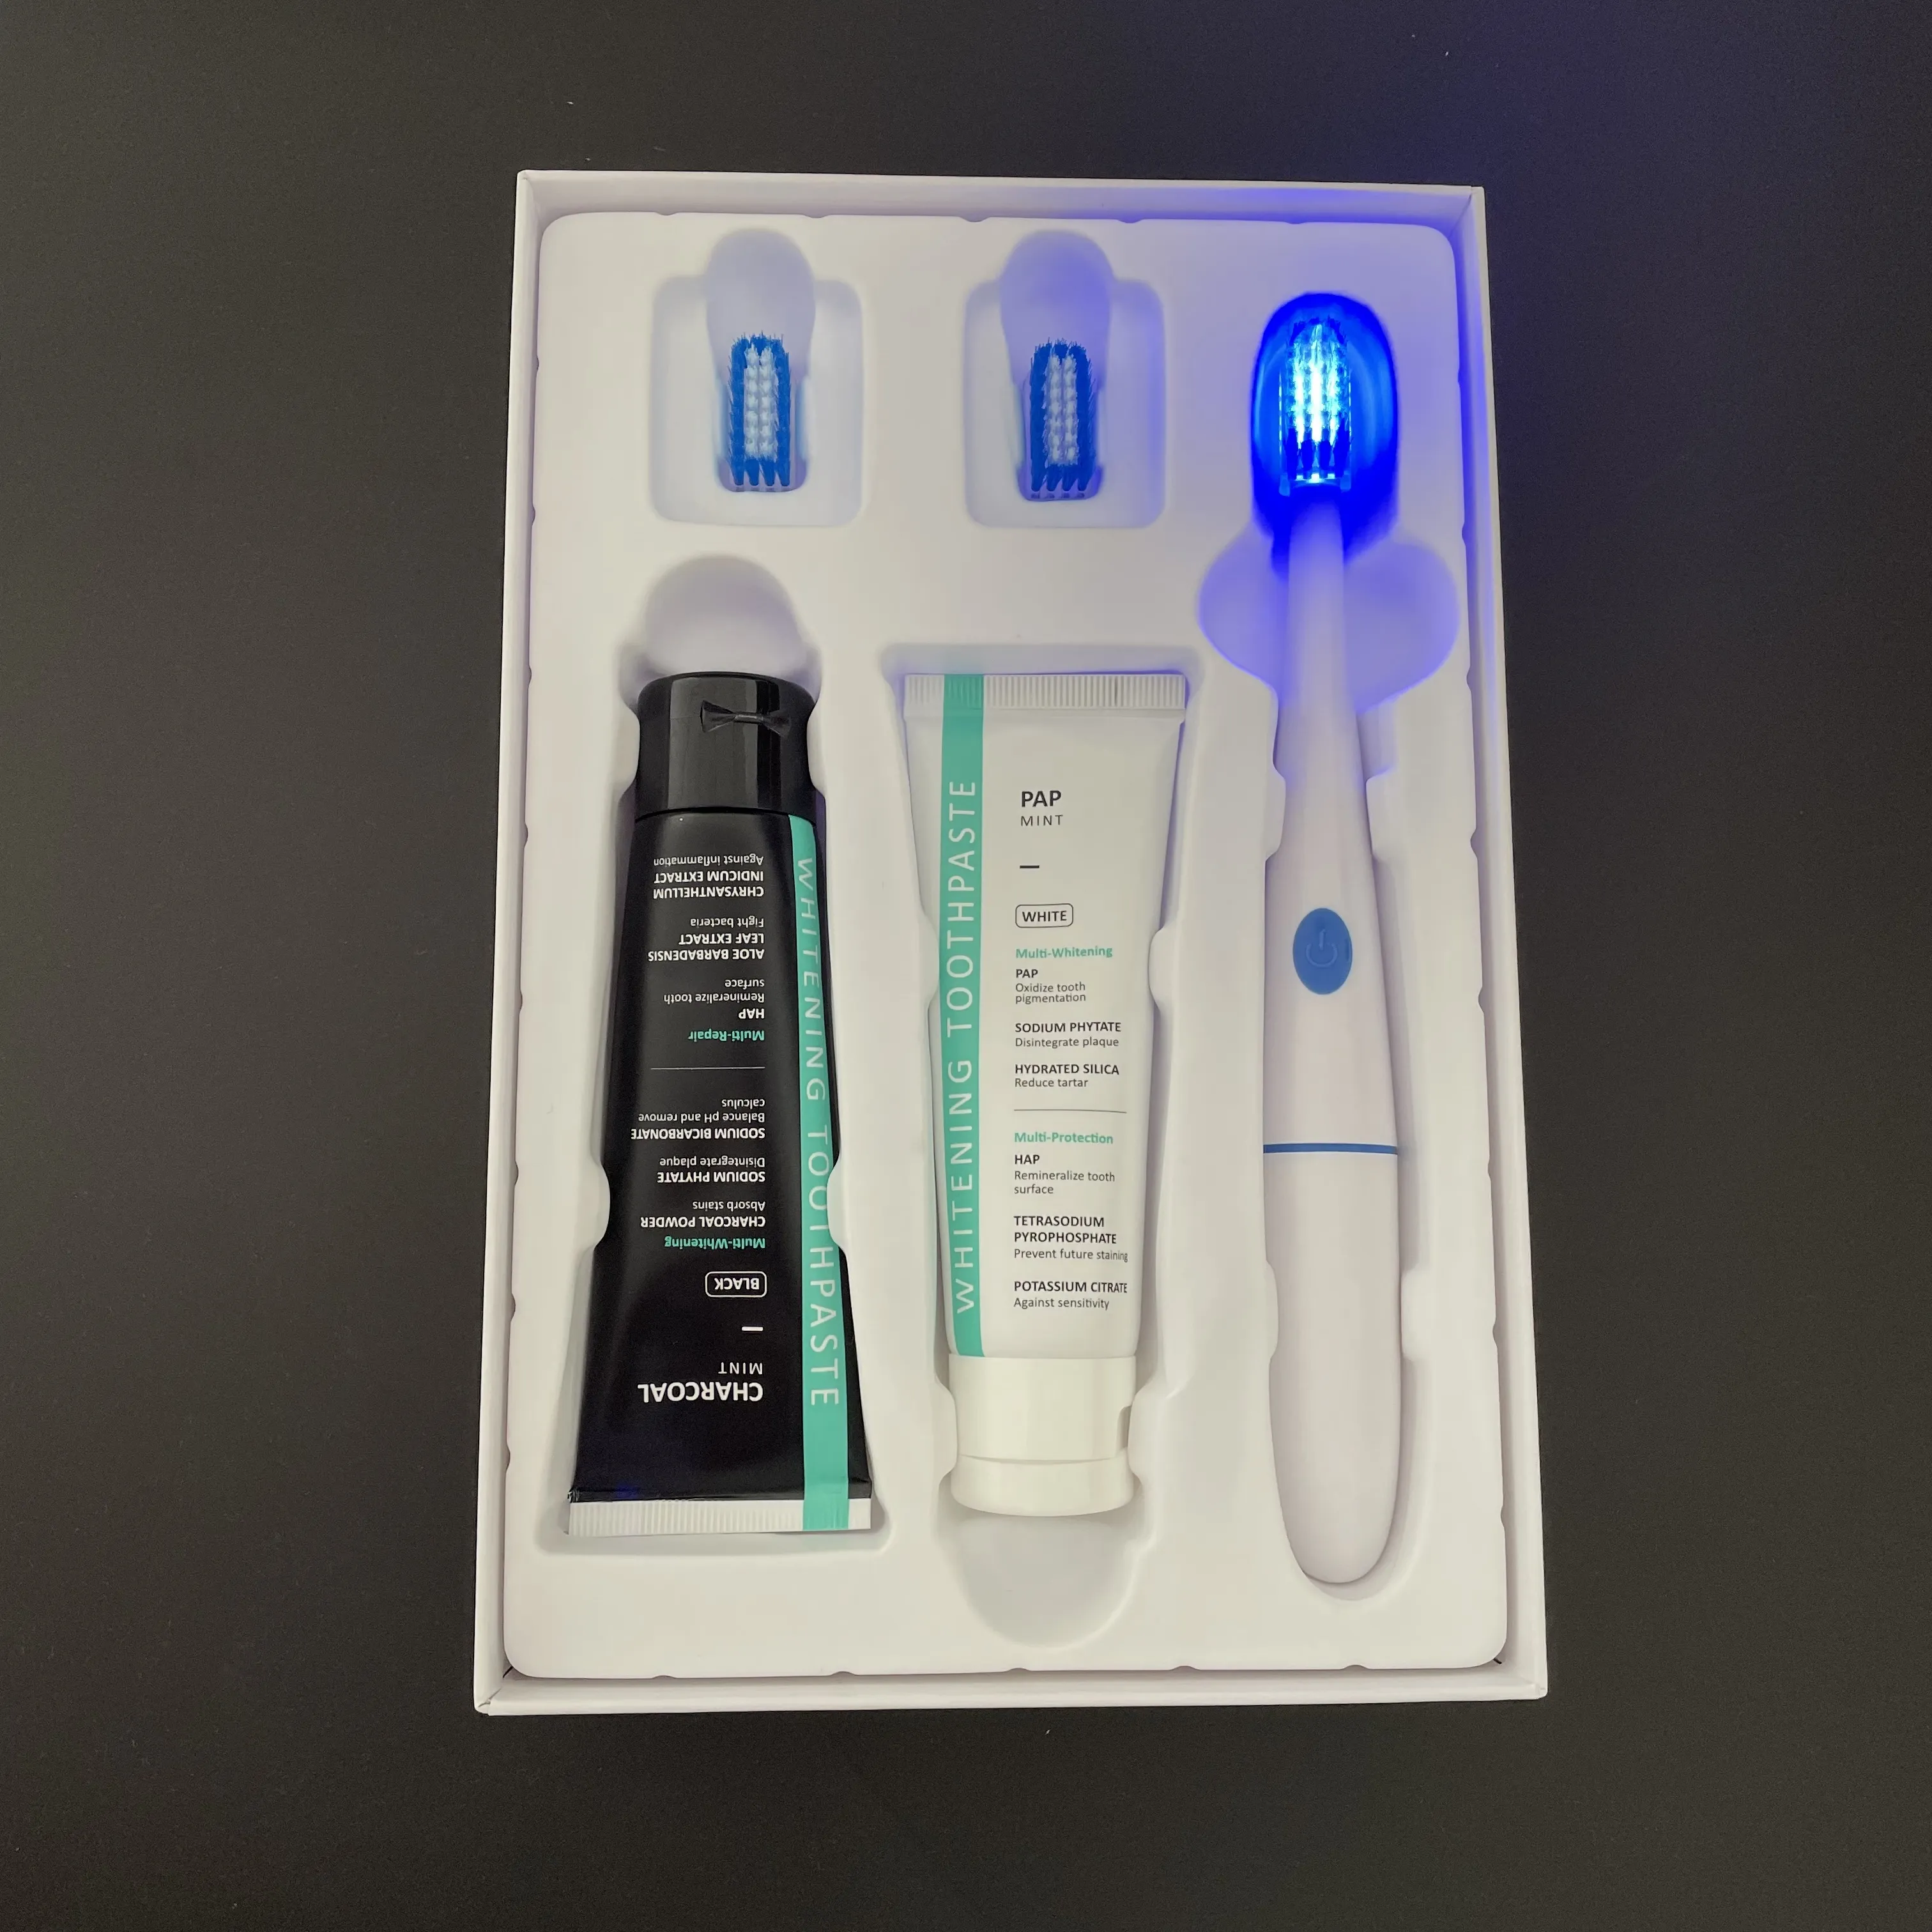 CE Approve    NEW Patent TOOTHBRUSH Oral Care UV Light for Whitening Teeth